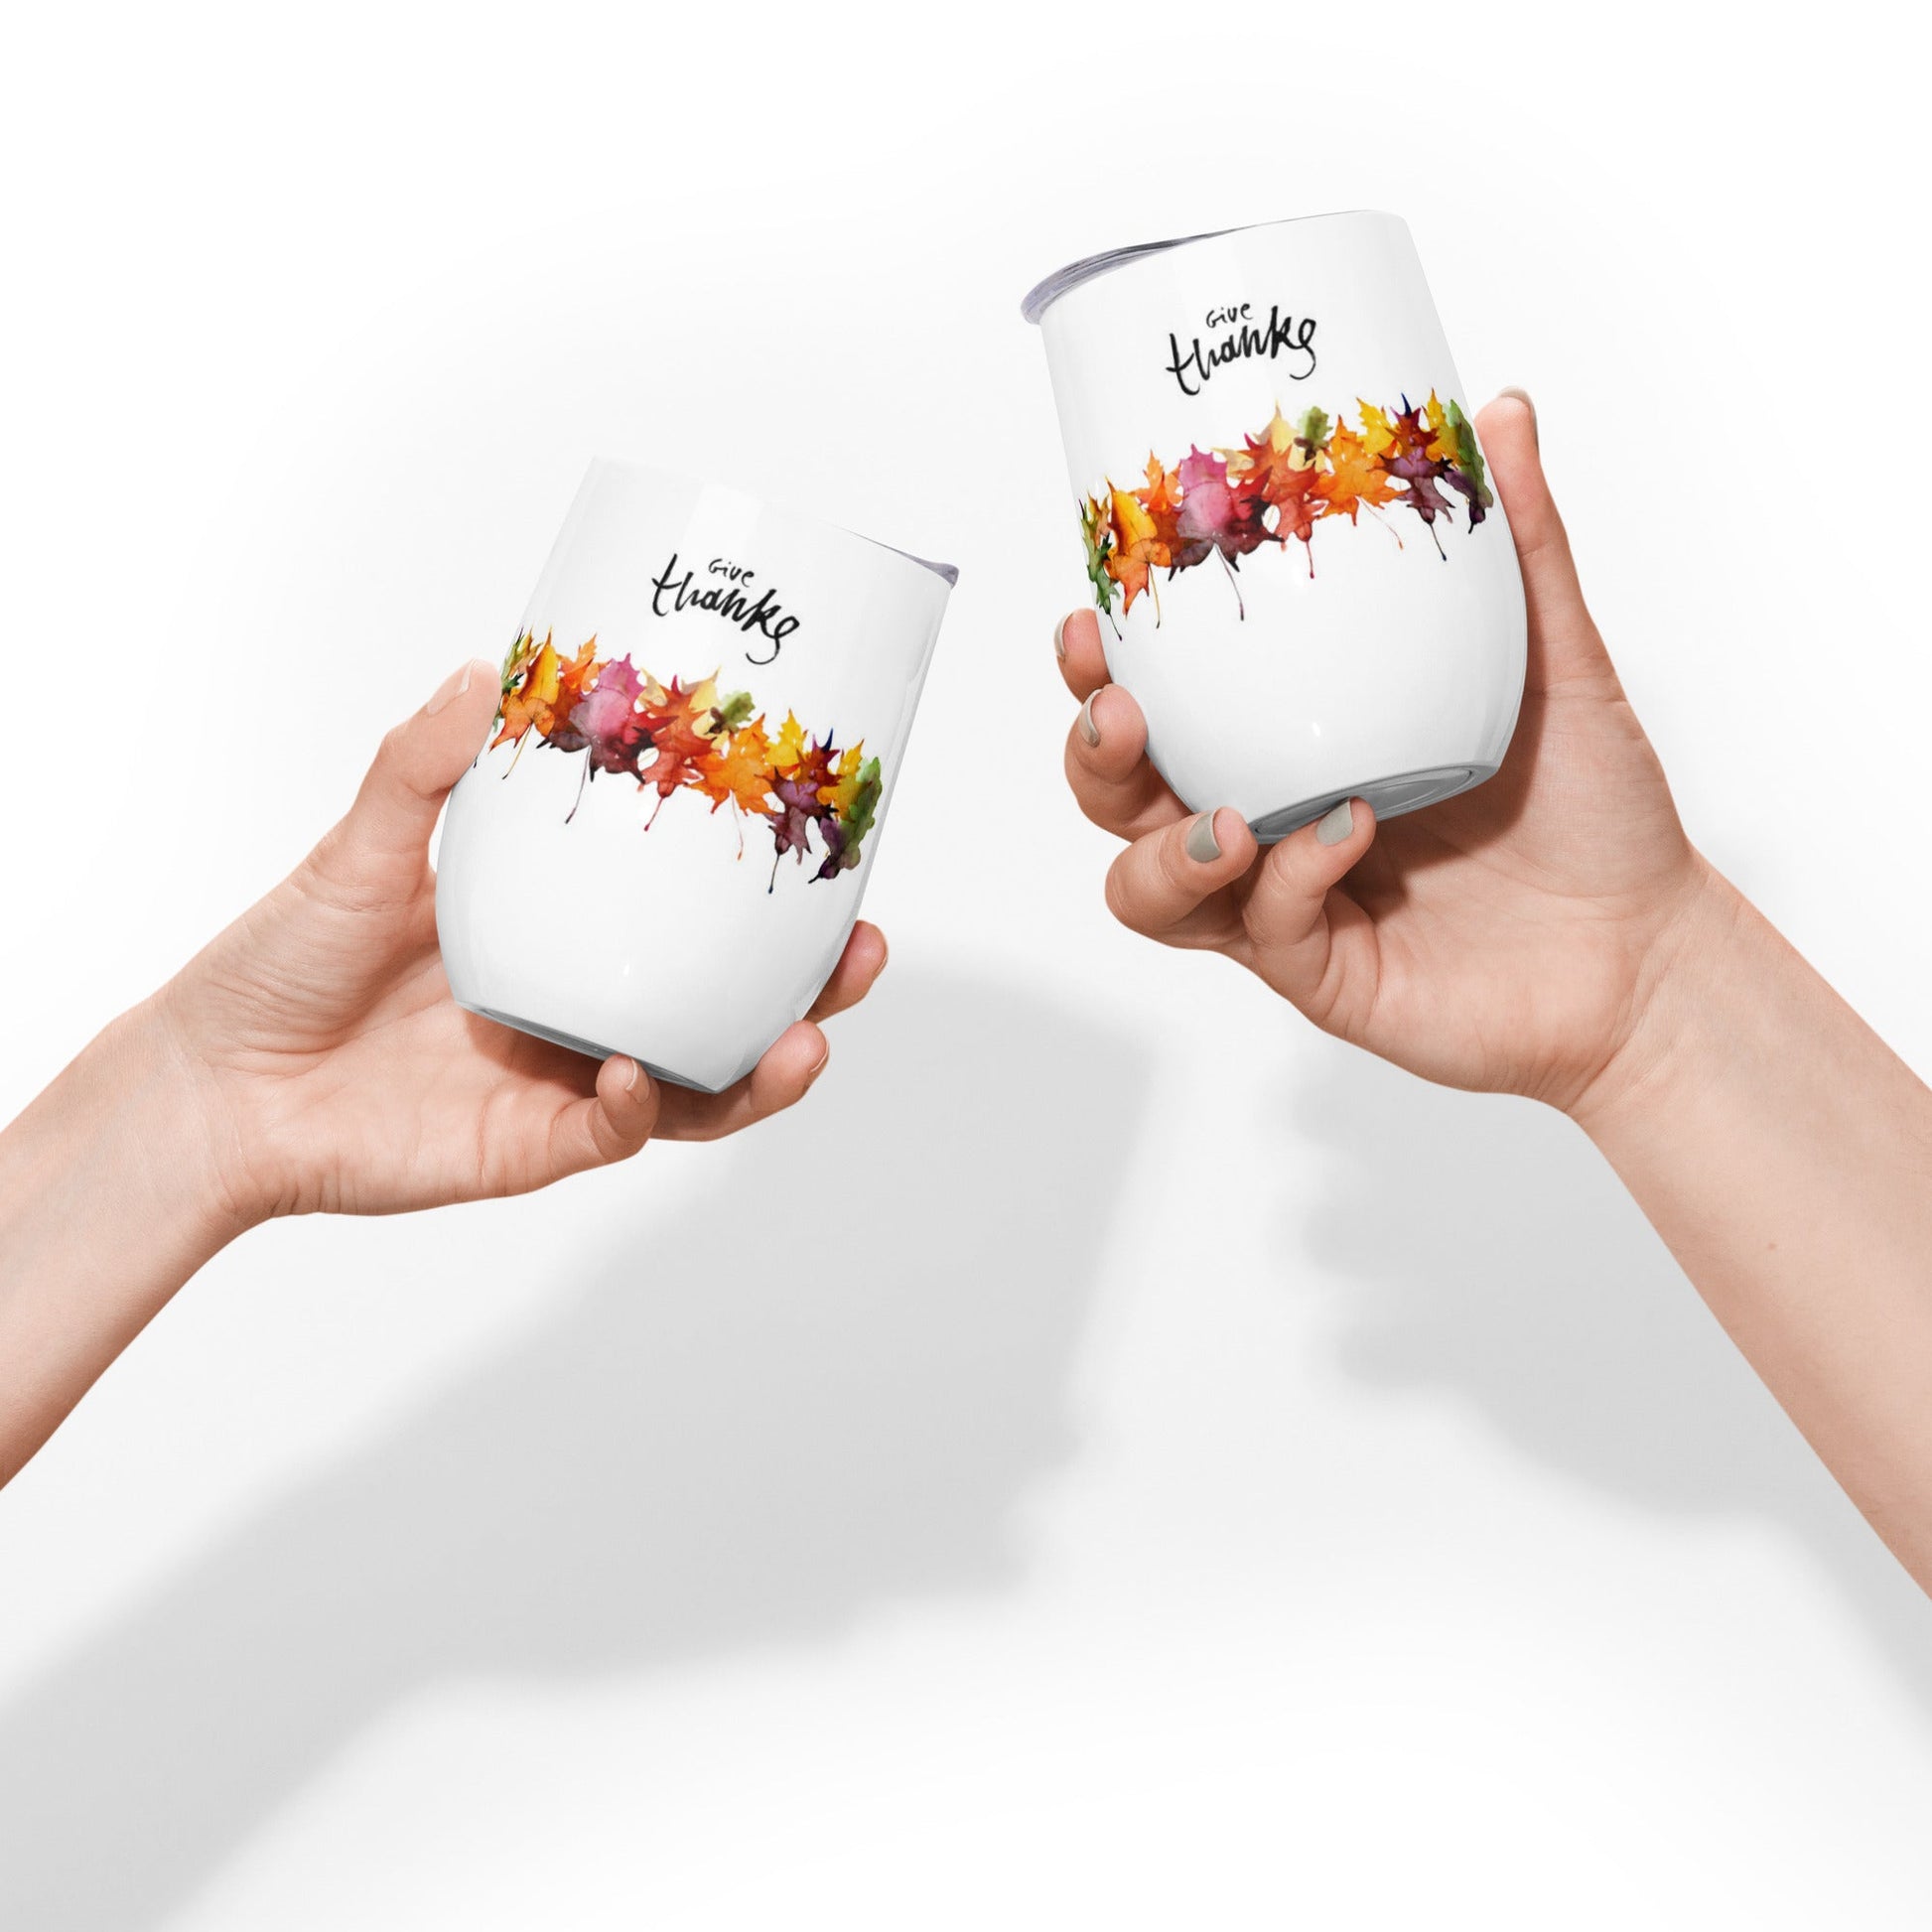 Tumblers - Give Thanks Wine Tumbler Happy Thanksgiving